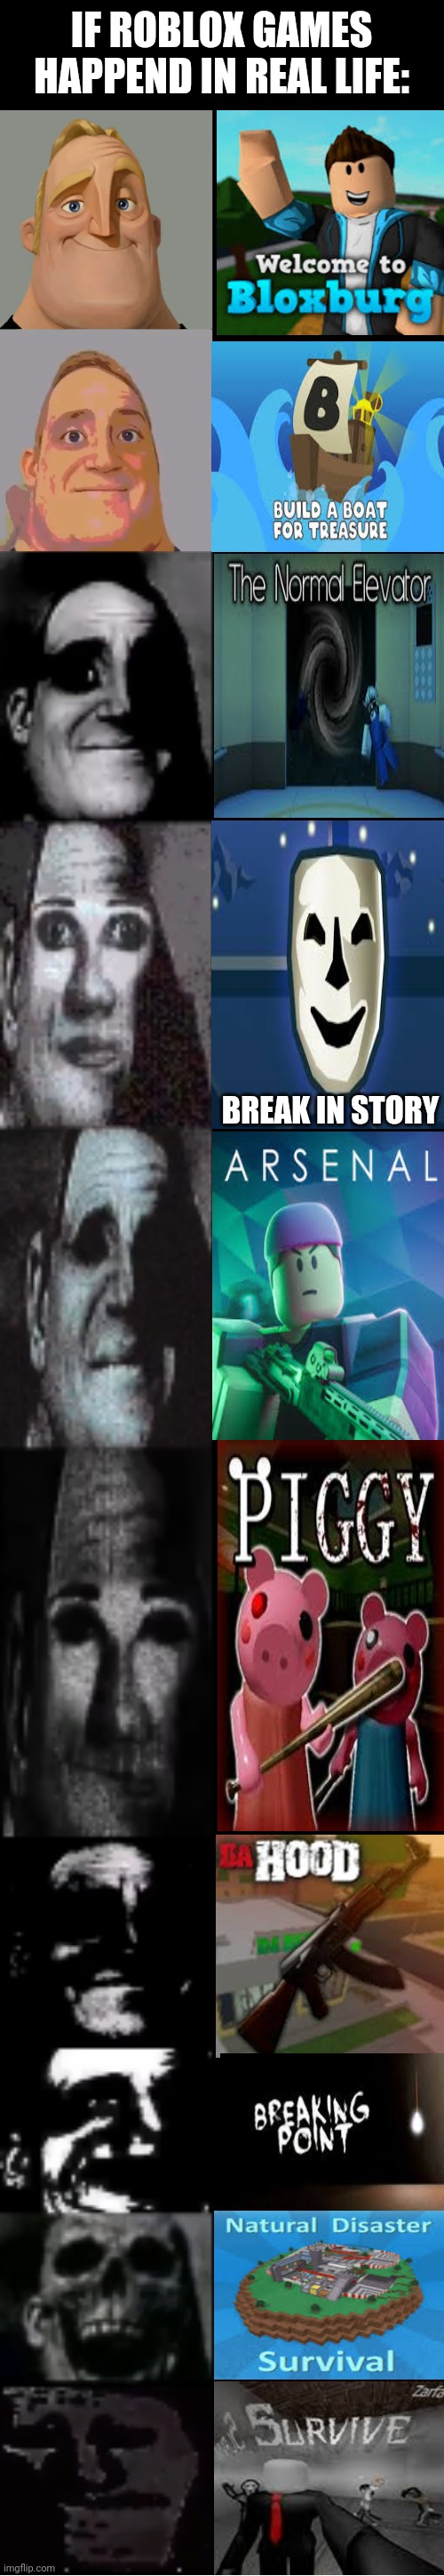 I made a Mr. Incredible becoming uncanny meme! (Sorry if it's